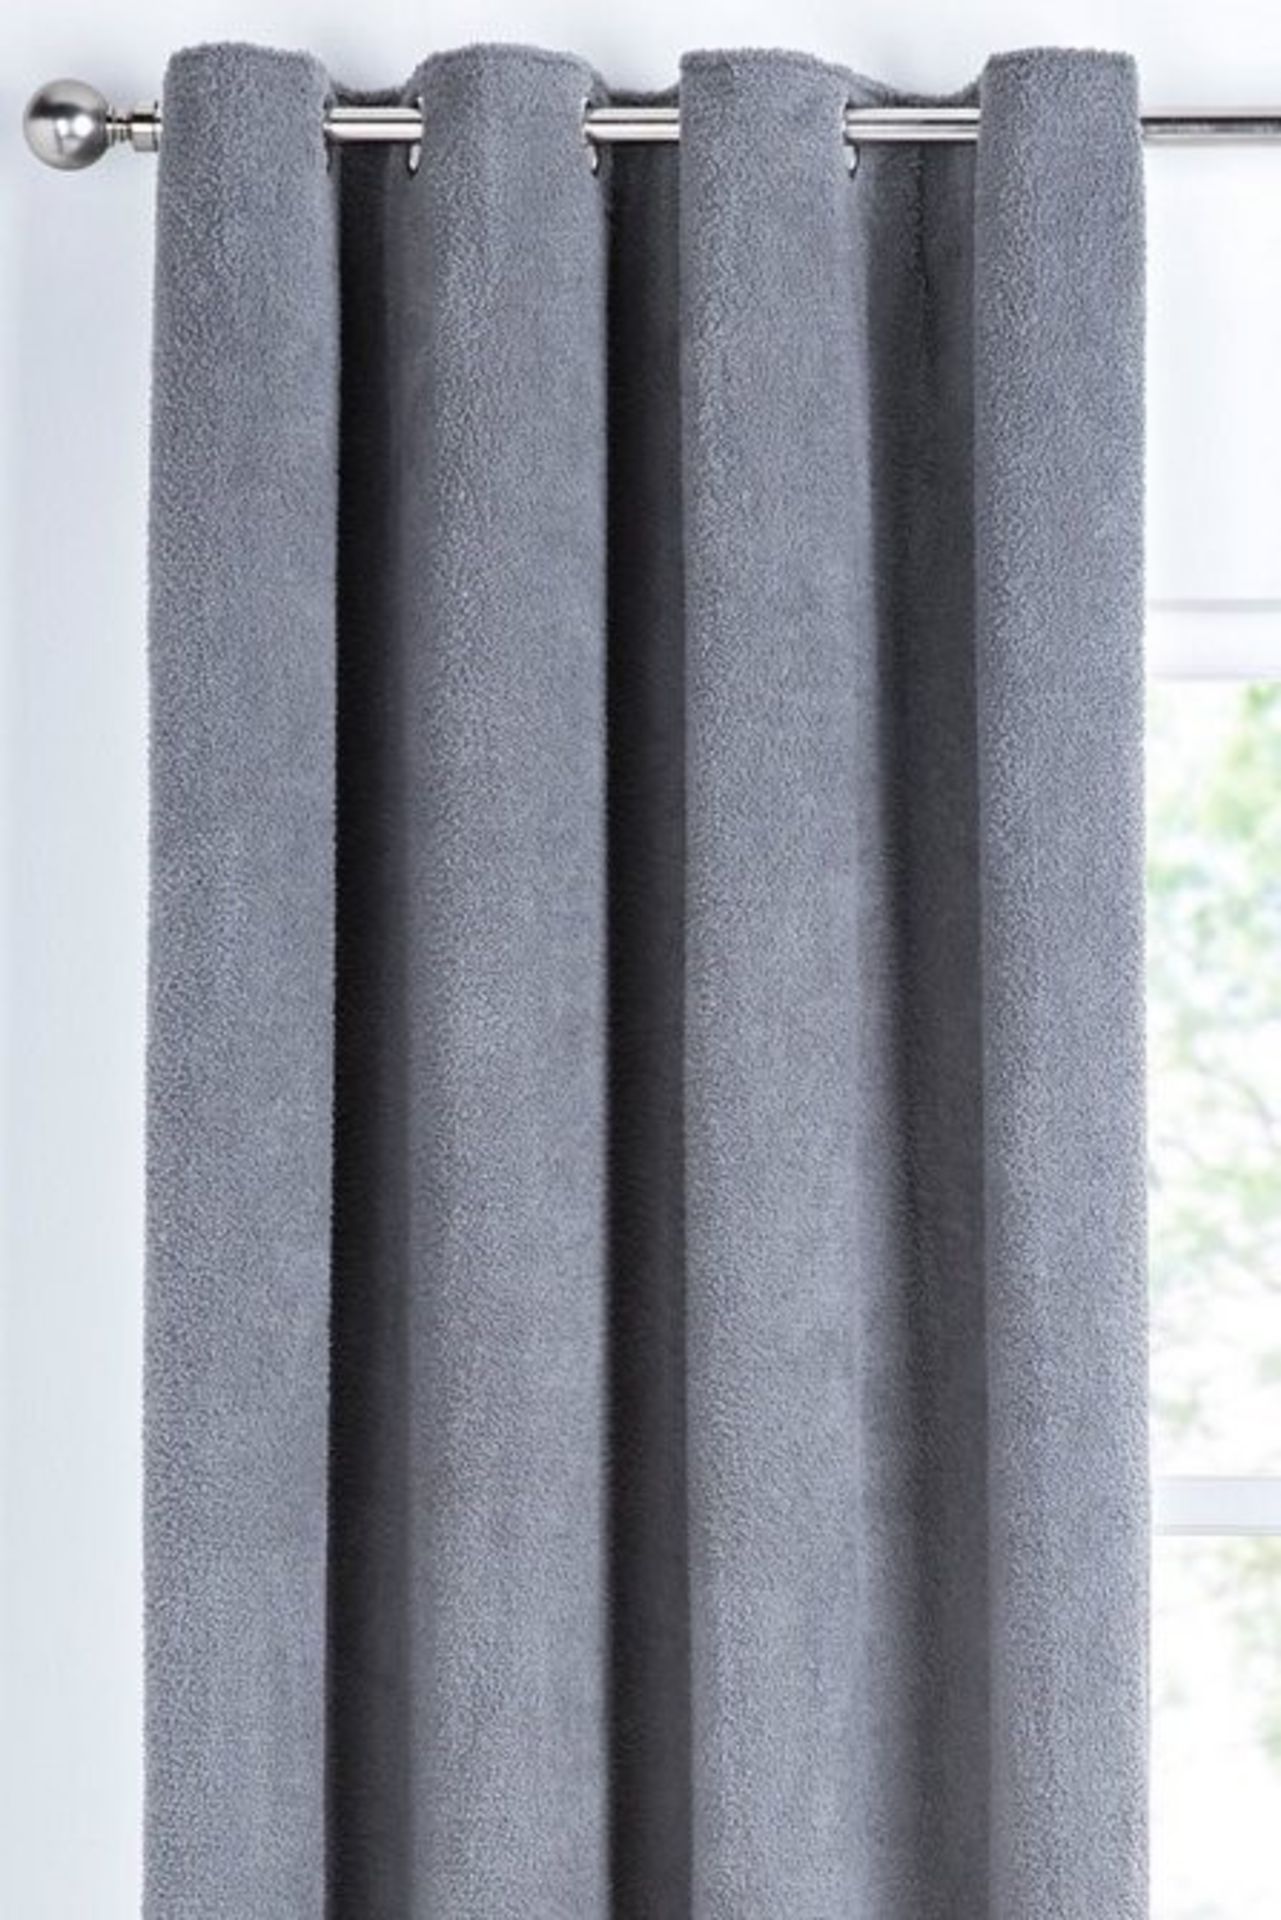 1 BAGGED COSY TEDDY EYELET CURTAINS IN GREY / SIZE UNKNOWN / RRP £33.99 (PUBLIC VIEWING AVAILABLE)